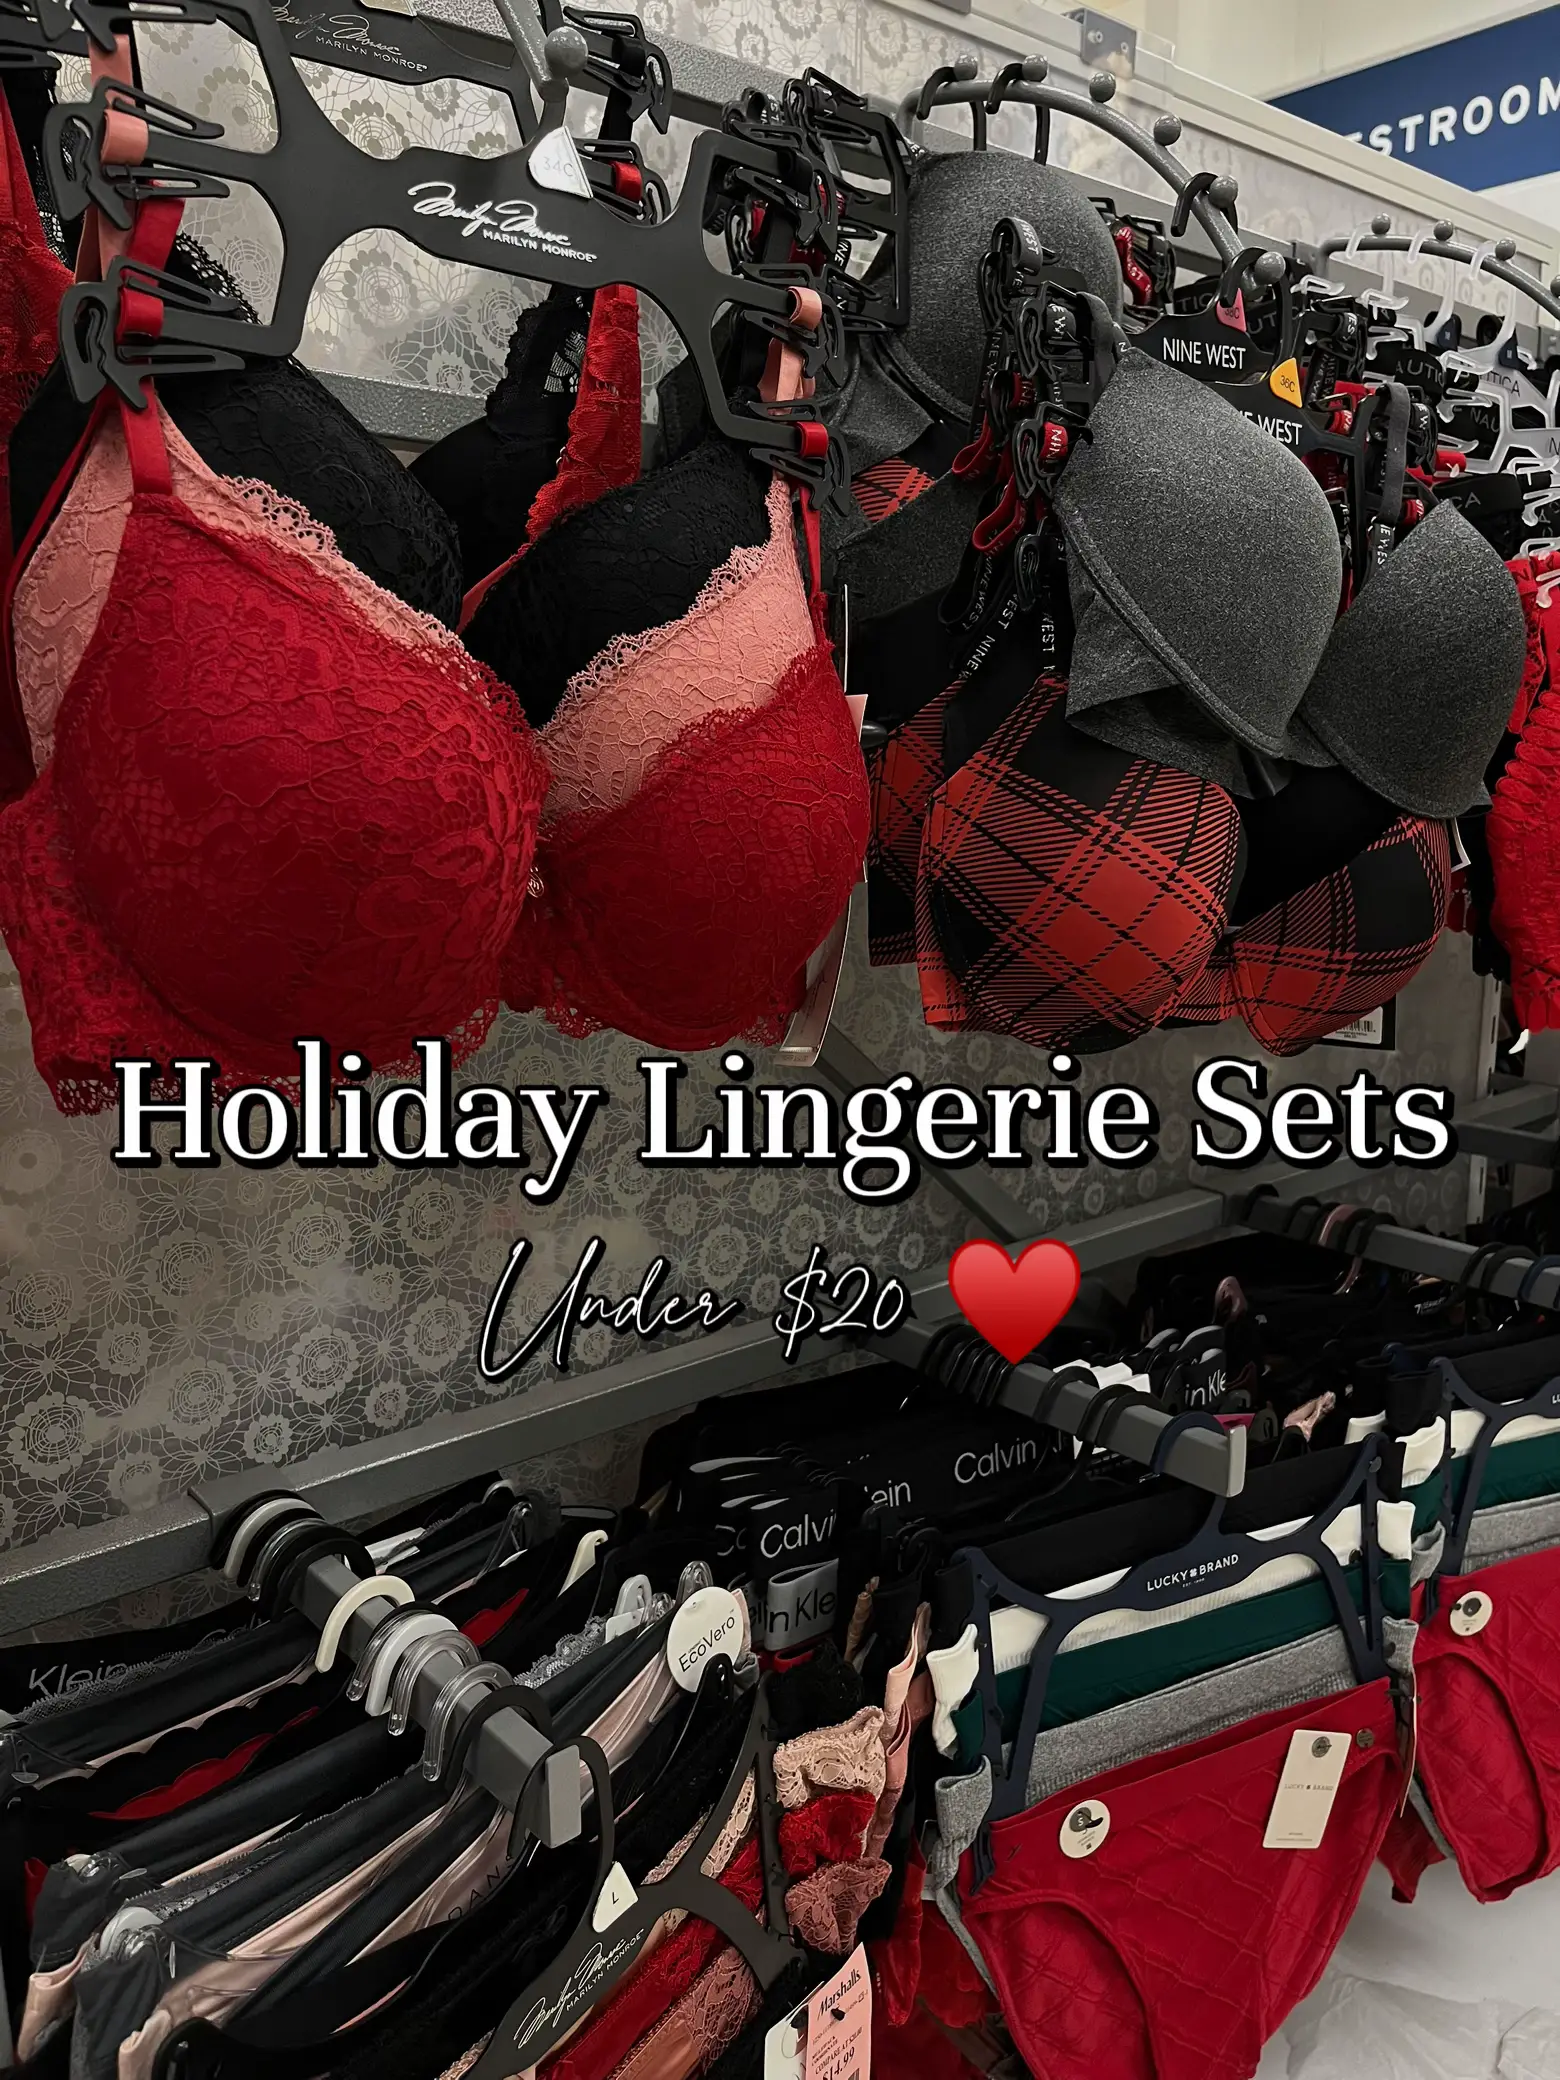 Goods - Our #lingerie department stocks a wide range of fashion